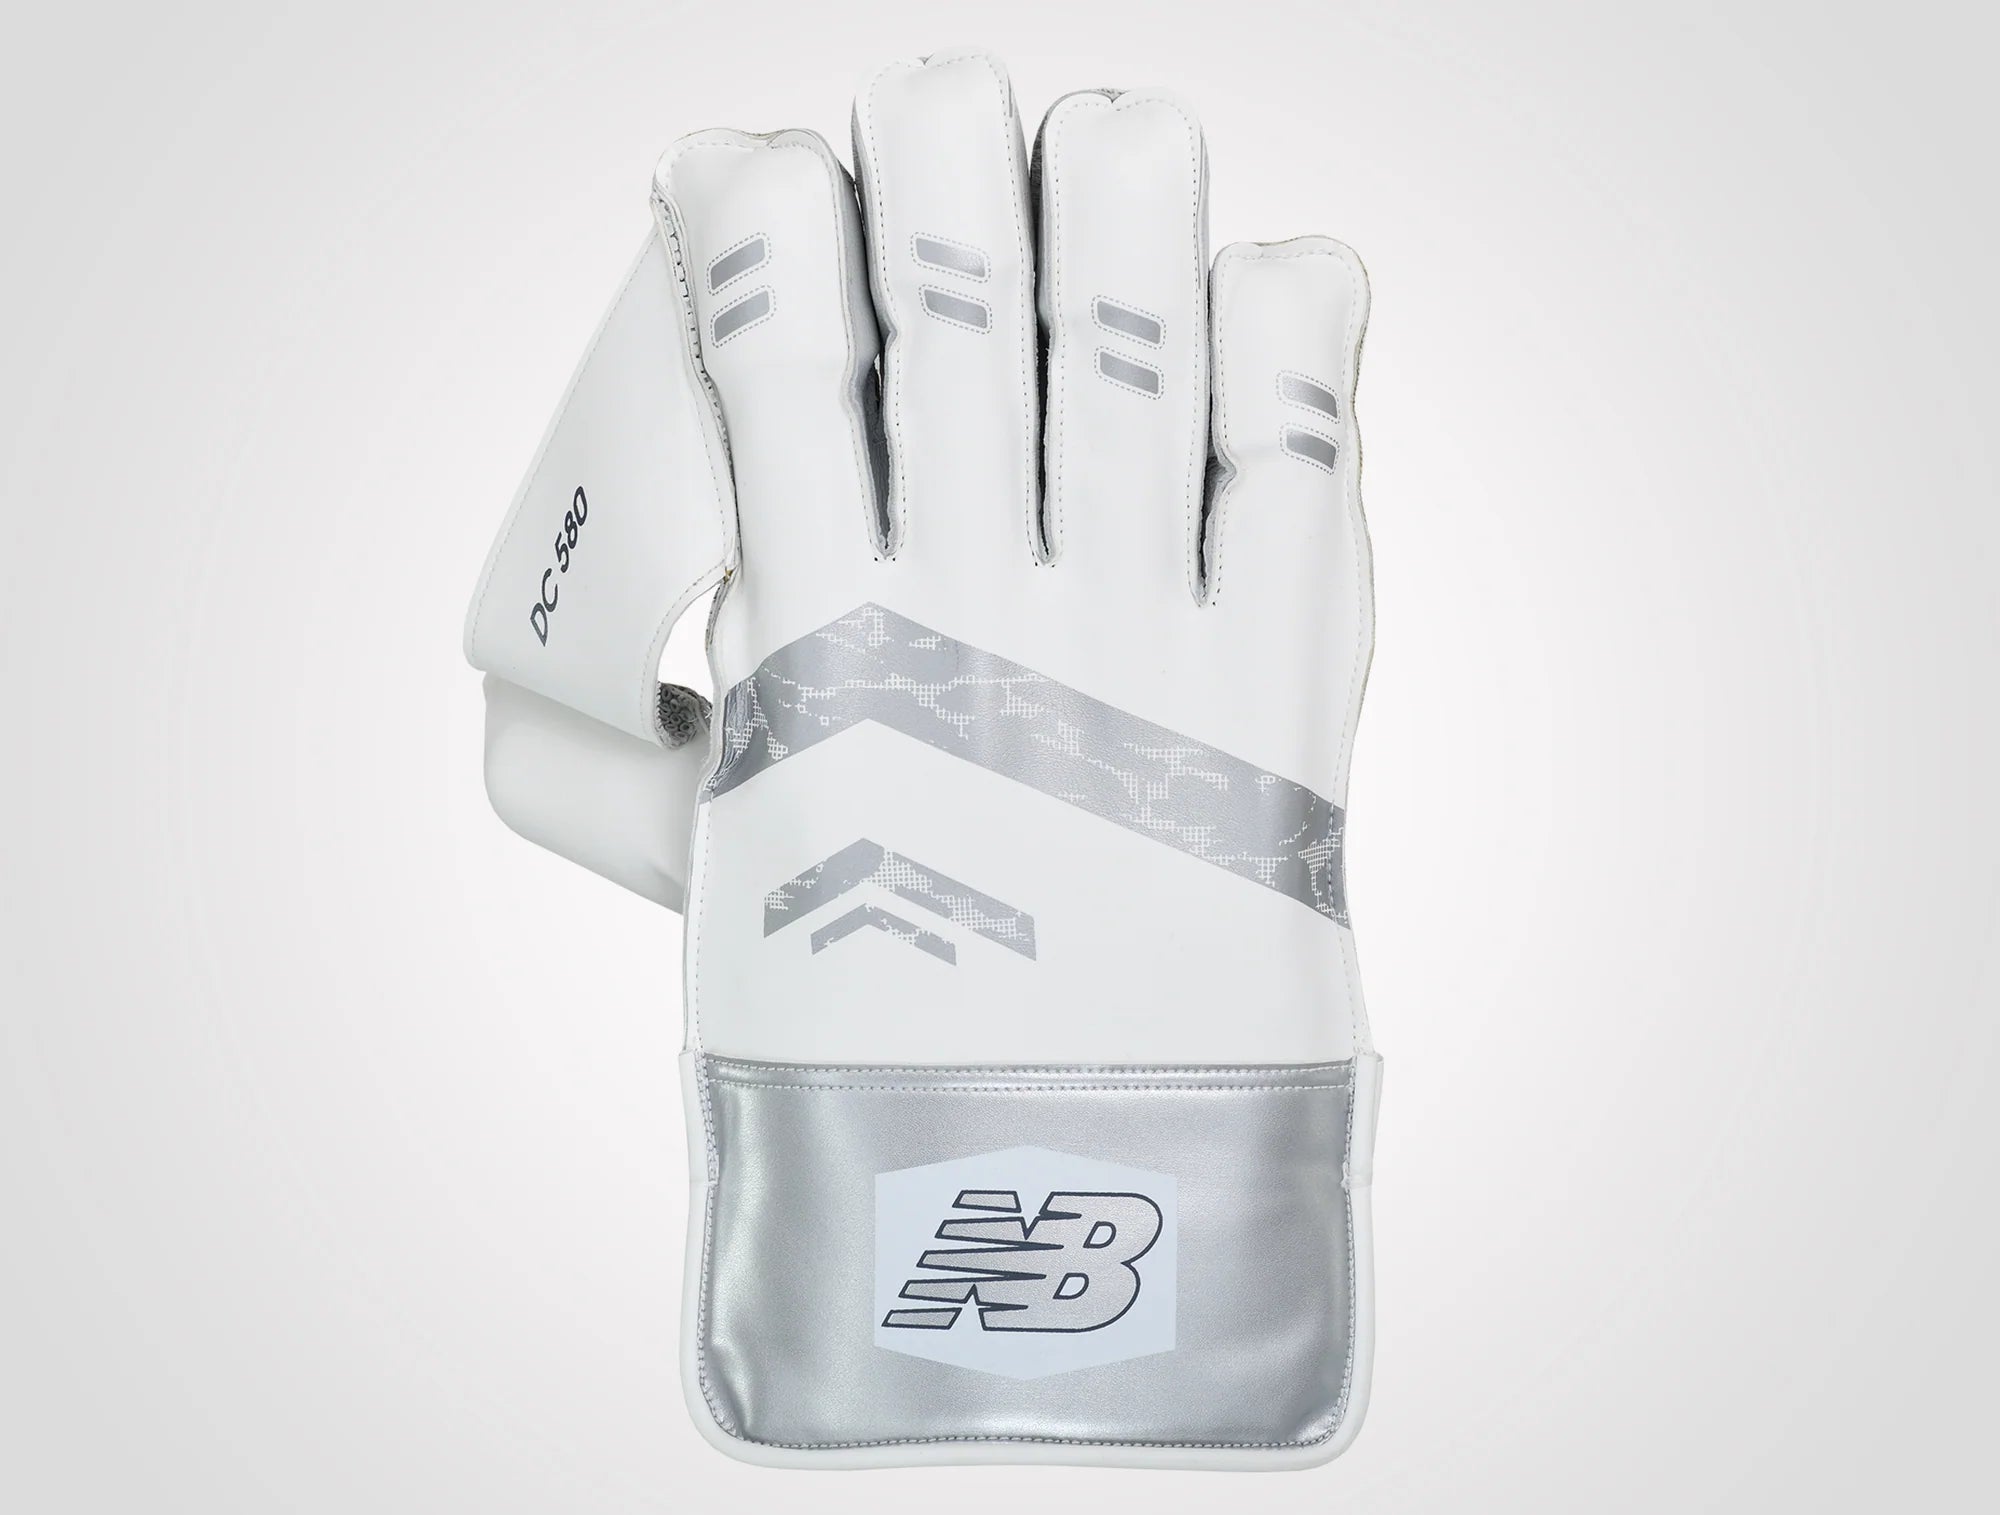 NB DC 580 Junior / Youth Cricket Wicket Keeping Gloves